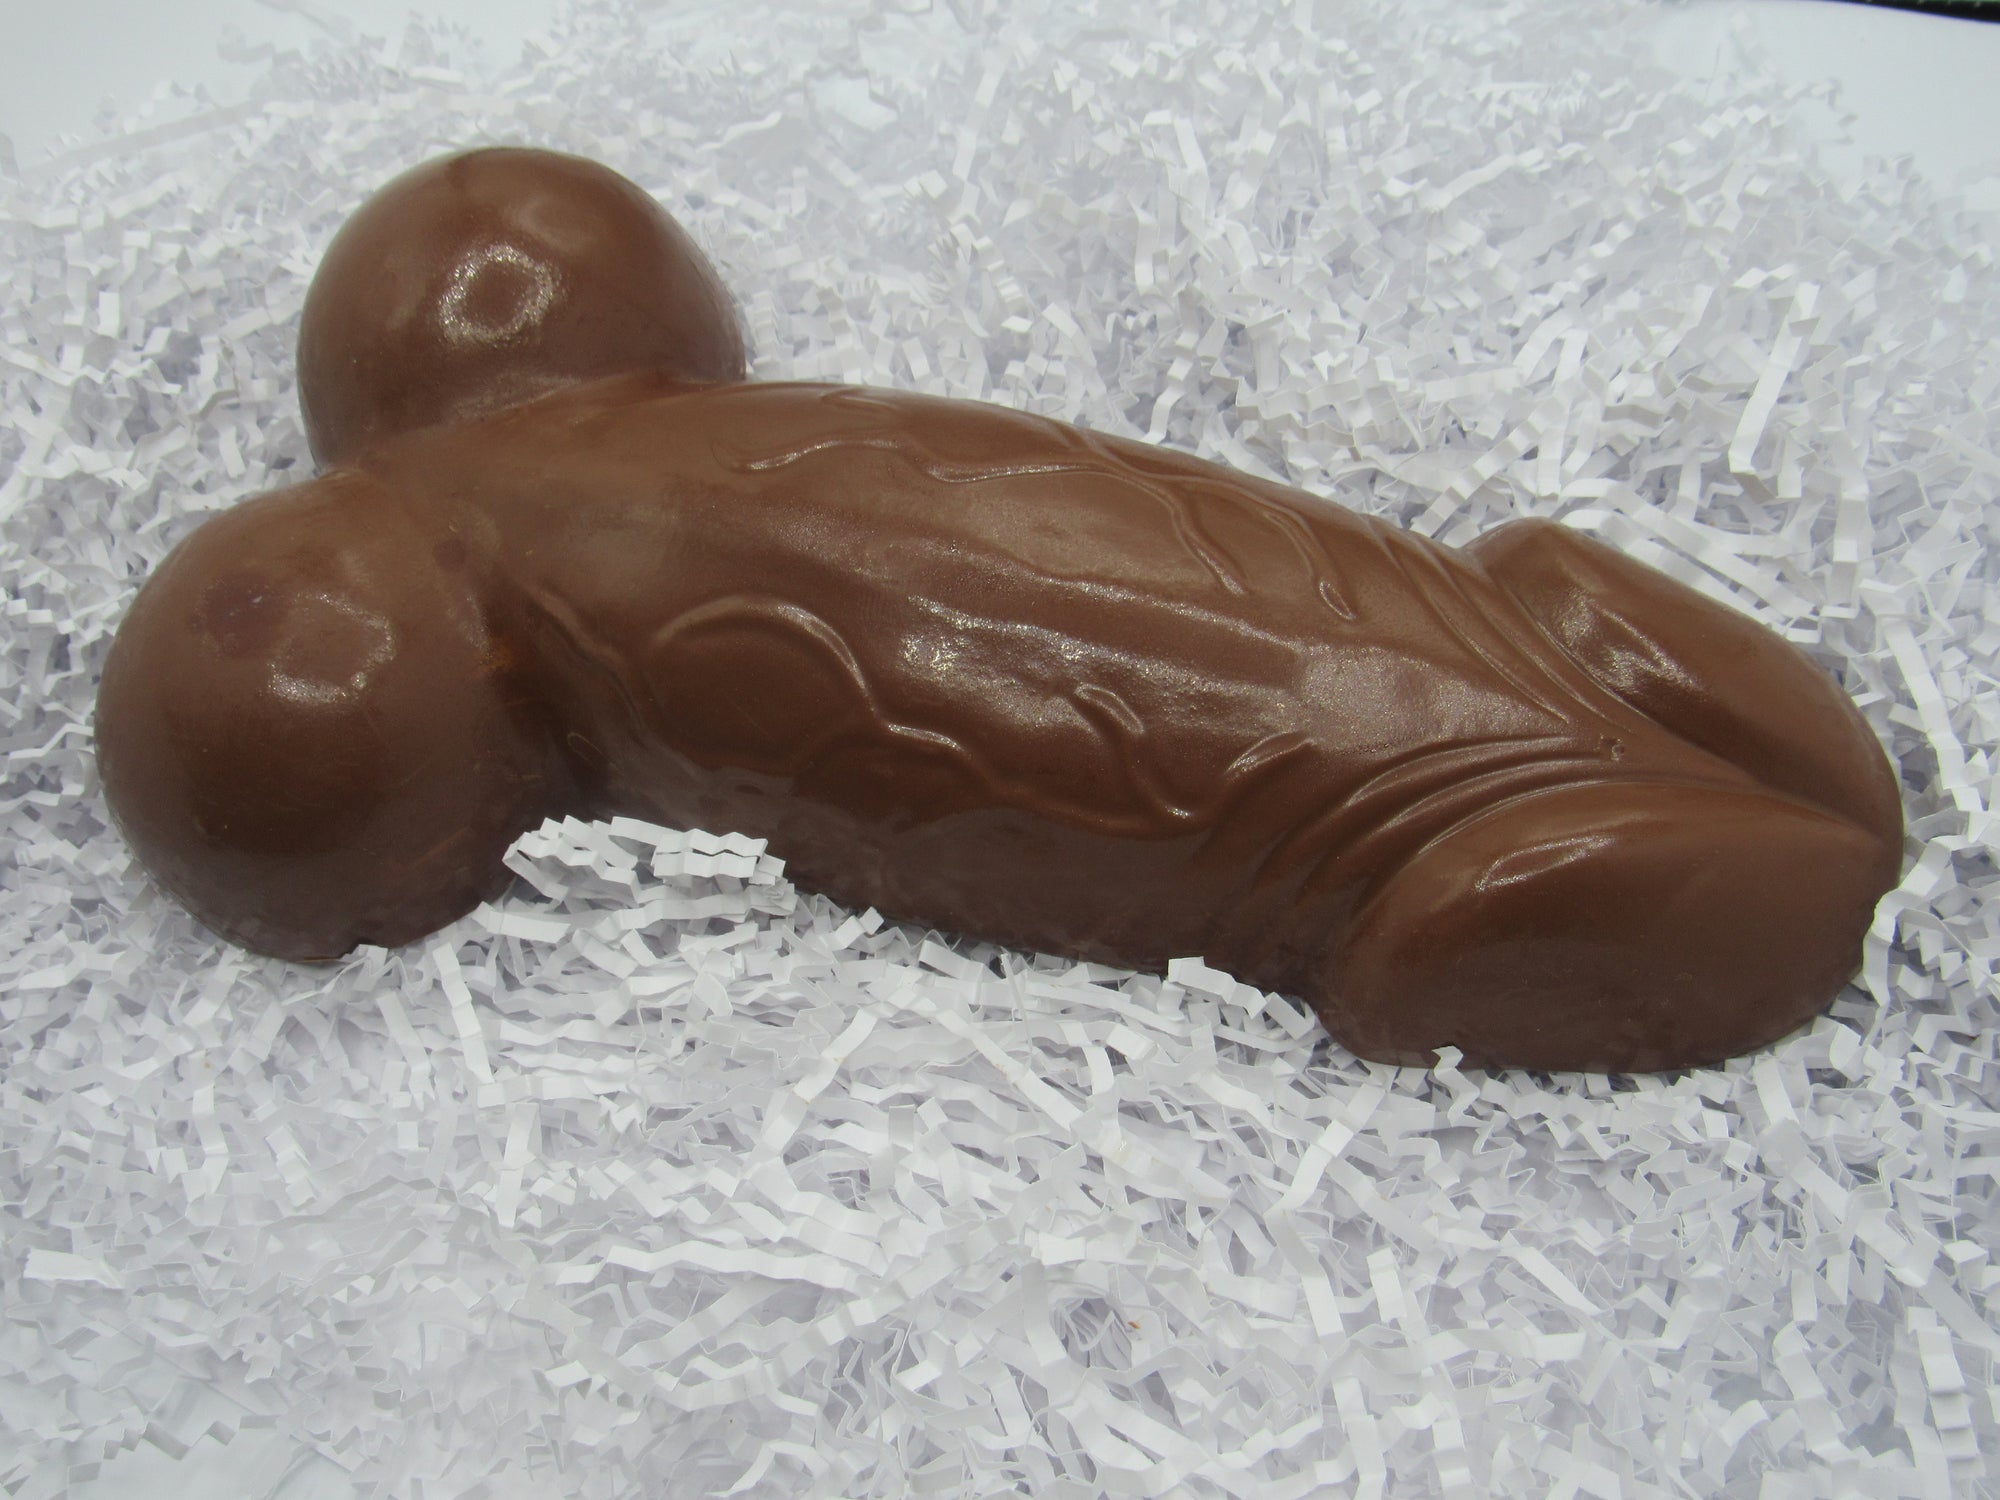 The Schlong - A Giant 11 Inch Chocolate Dick